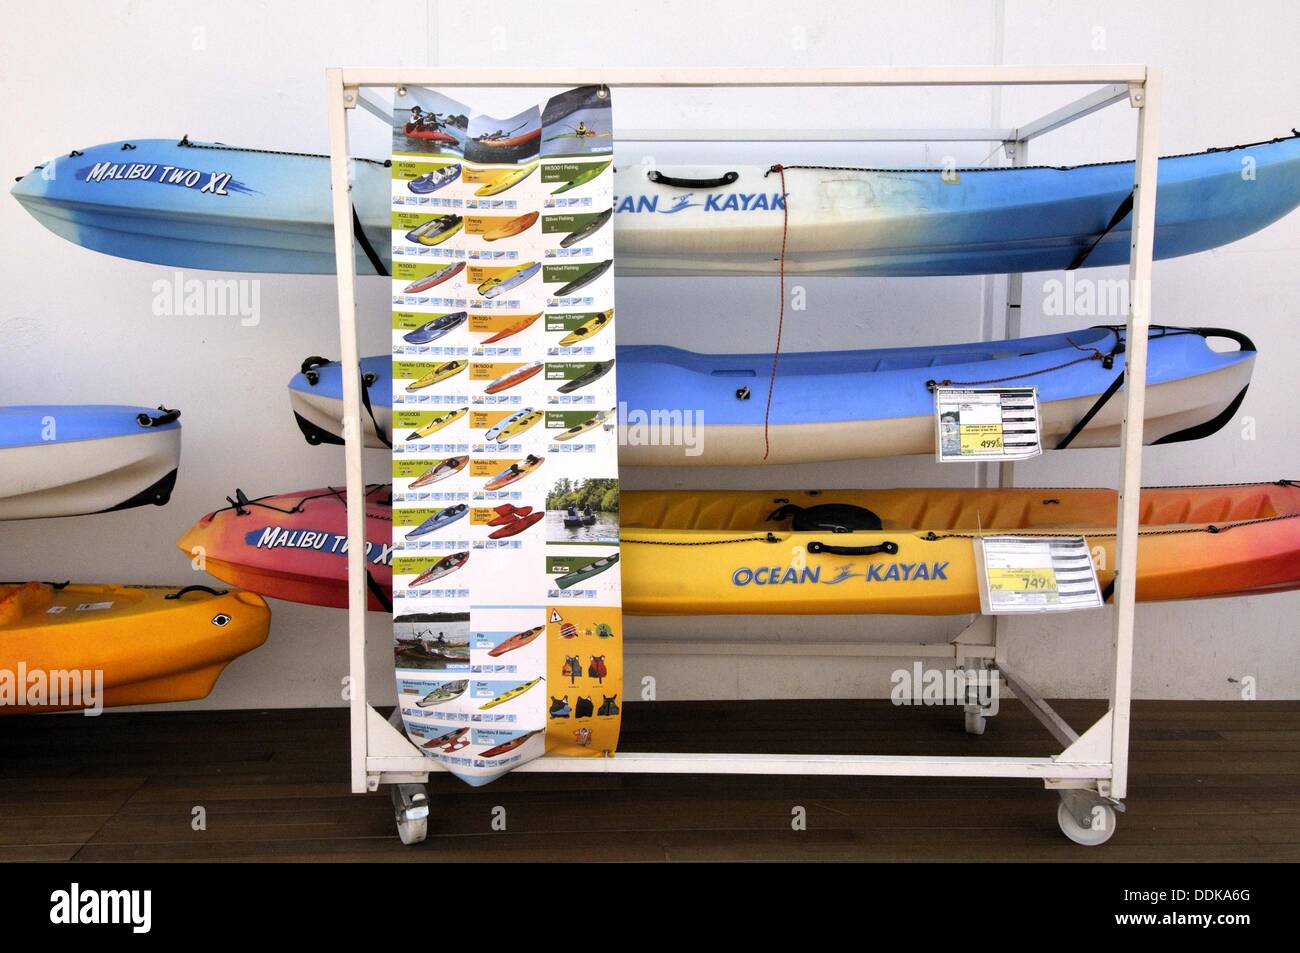 Canoes For Sale In A Sporting Goods Store Barcelona Catalonia